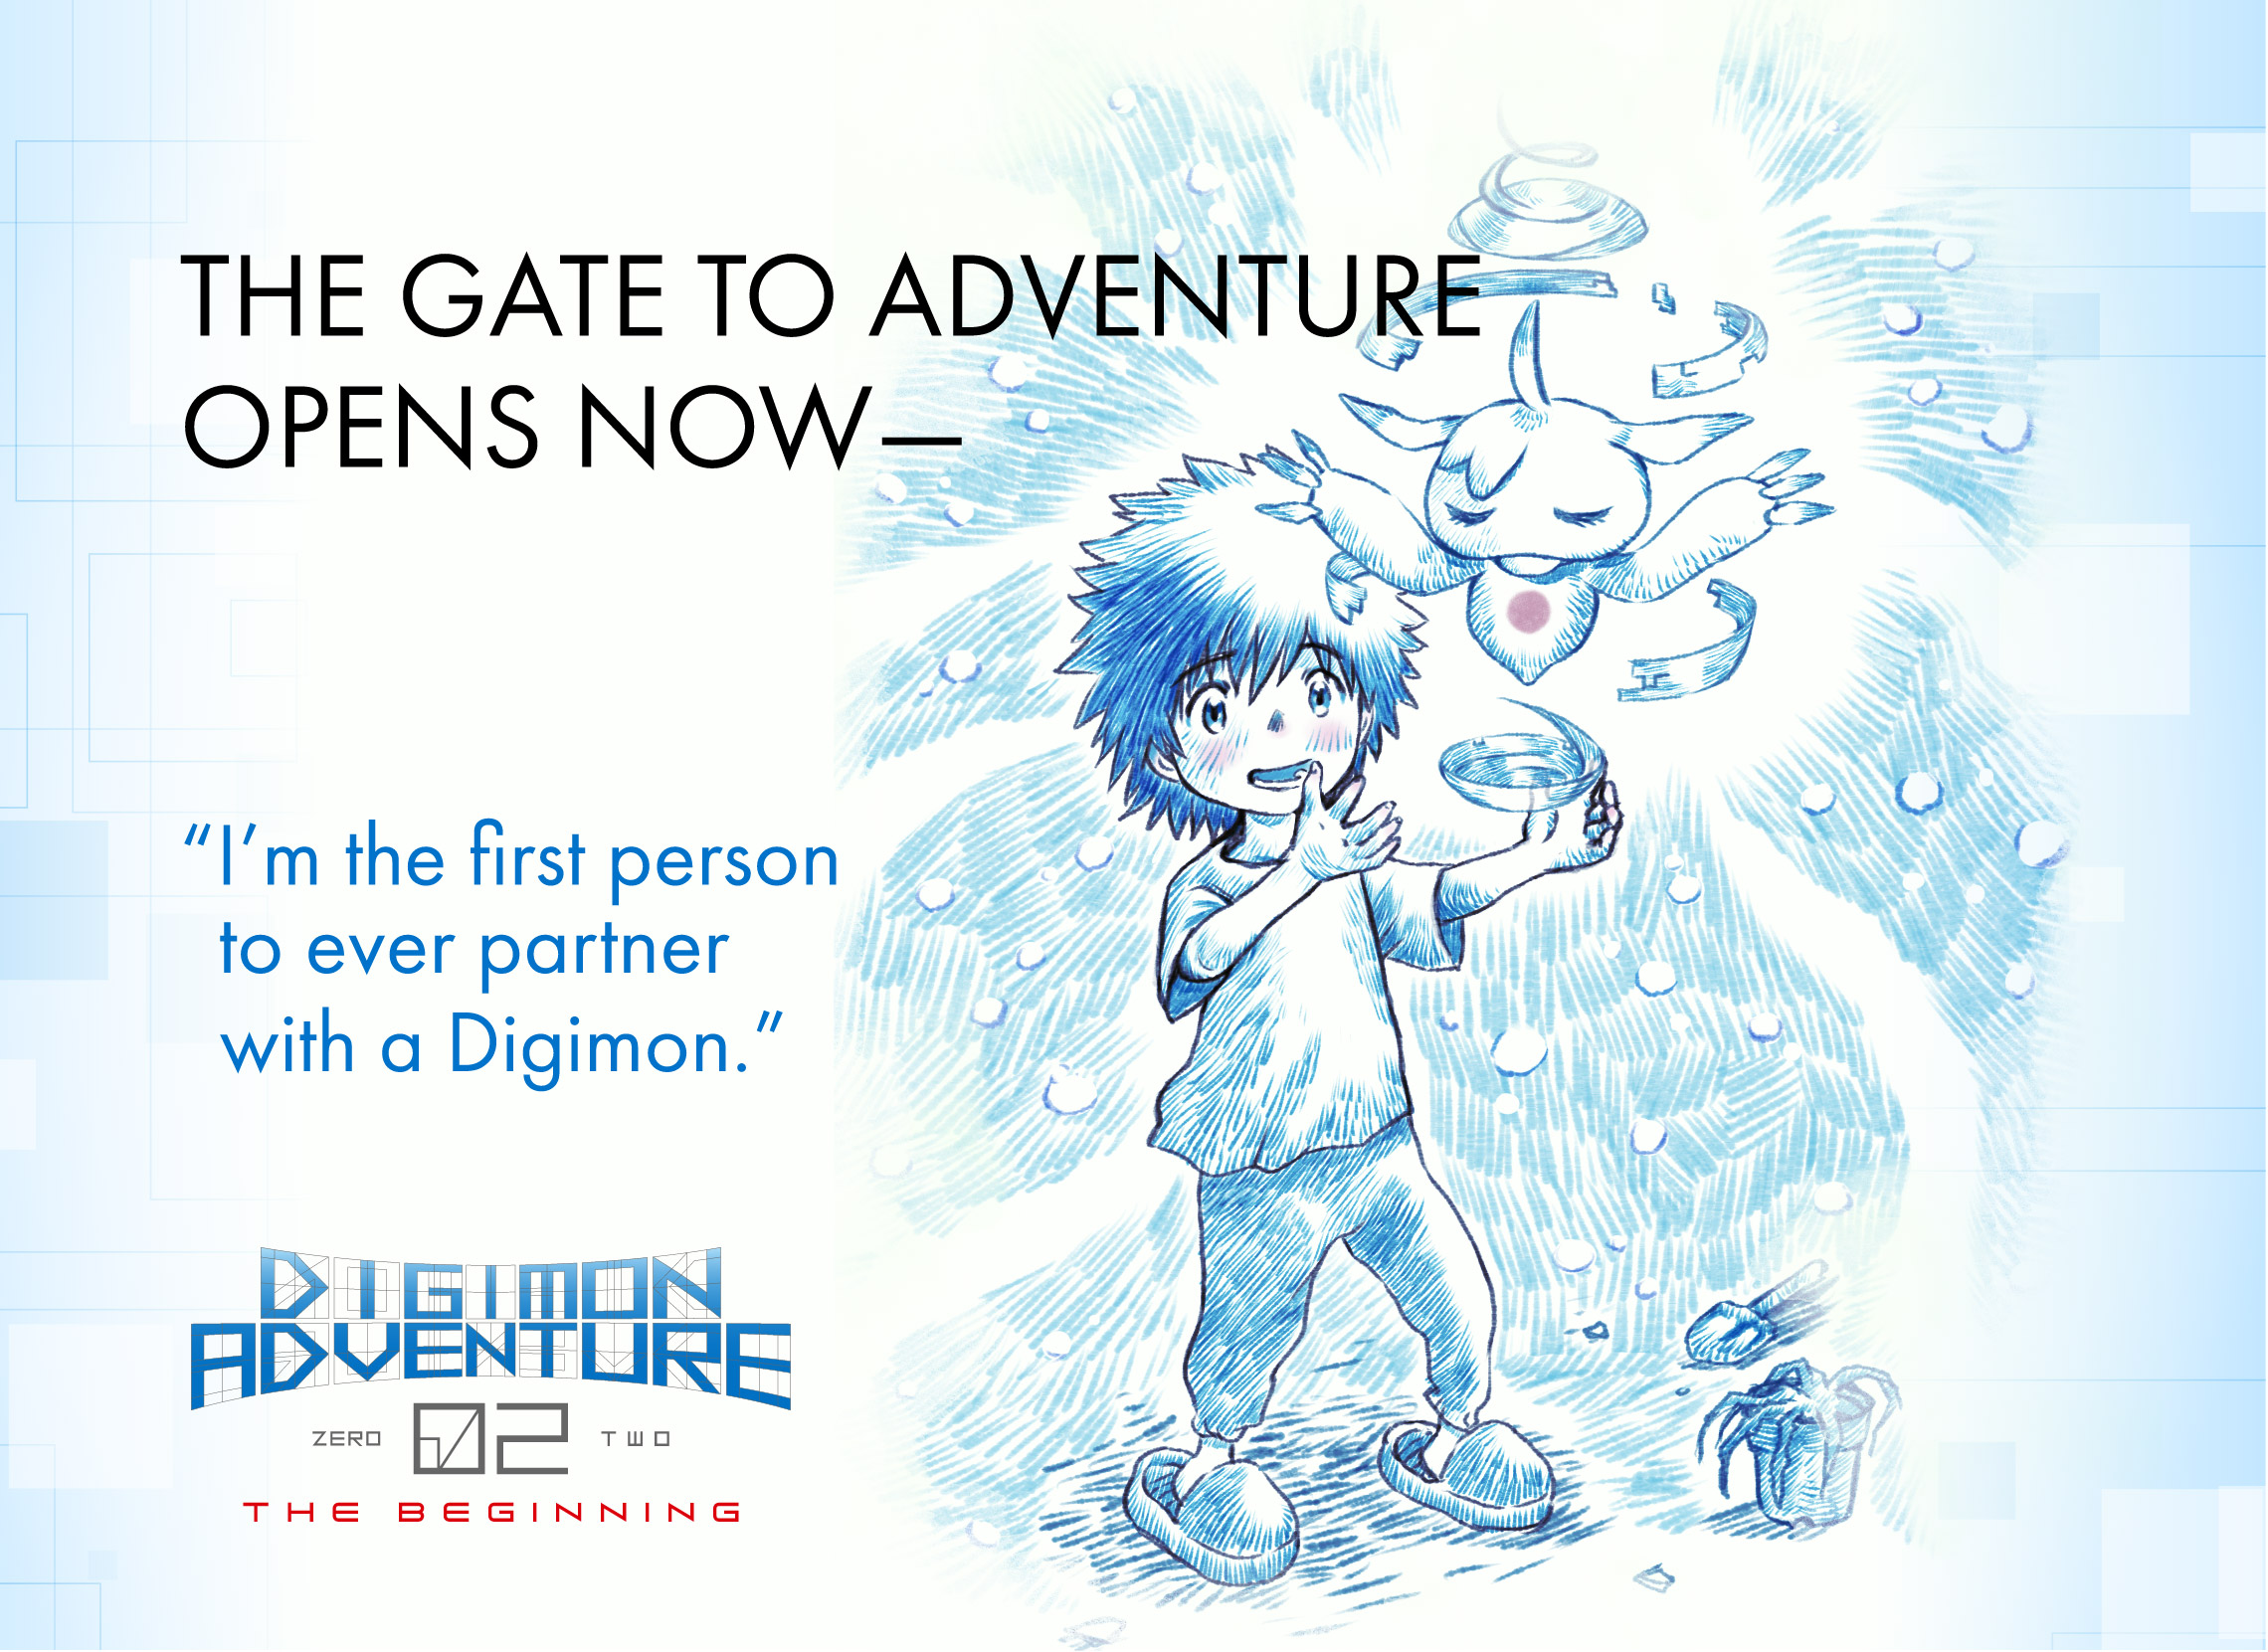 「Digimon Adventure 02 THE BEGINNING」Official websiteI'm the first person to ever partner with a Digimon.The door to adventure opens now.